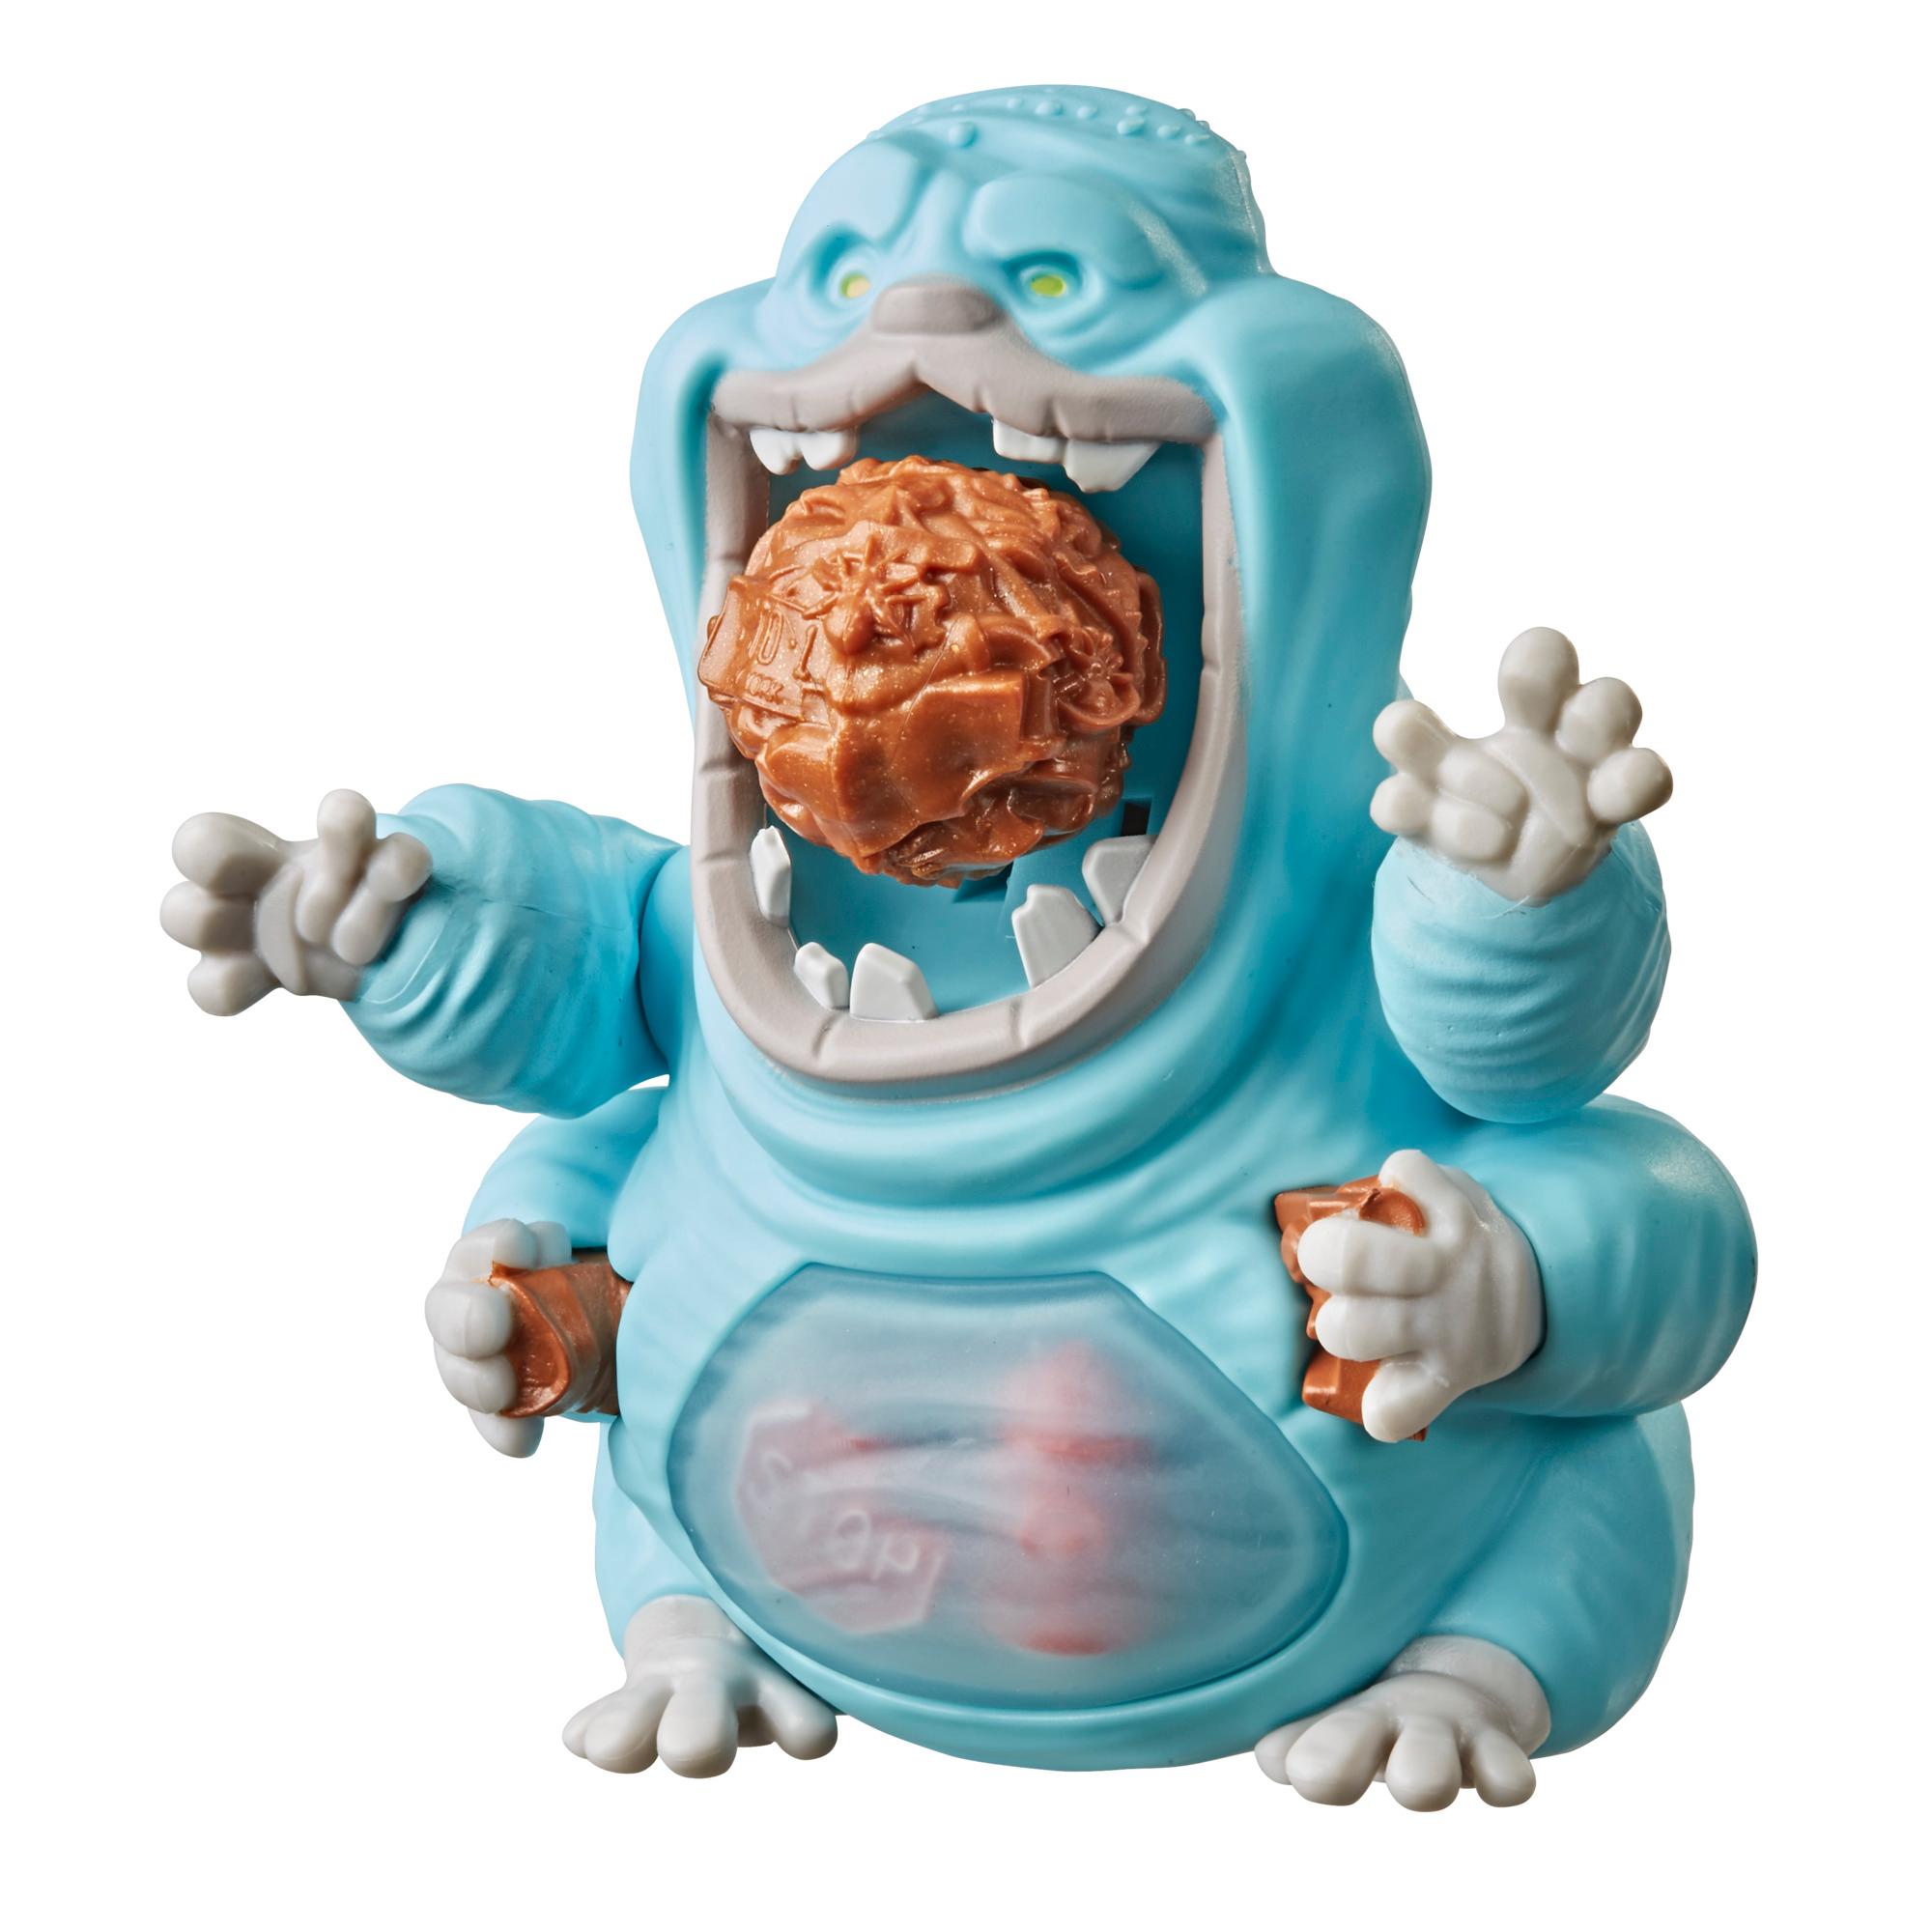 Hasbro Ghostbusters Fright Features Winston Zeddemore Figure with Interactive Slimer Figure and Accessory Toys for Kids Ages 4 and Up 